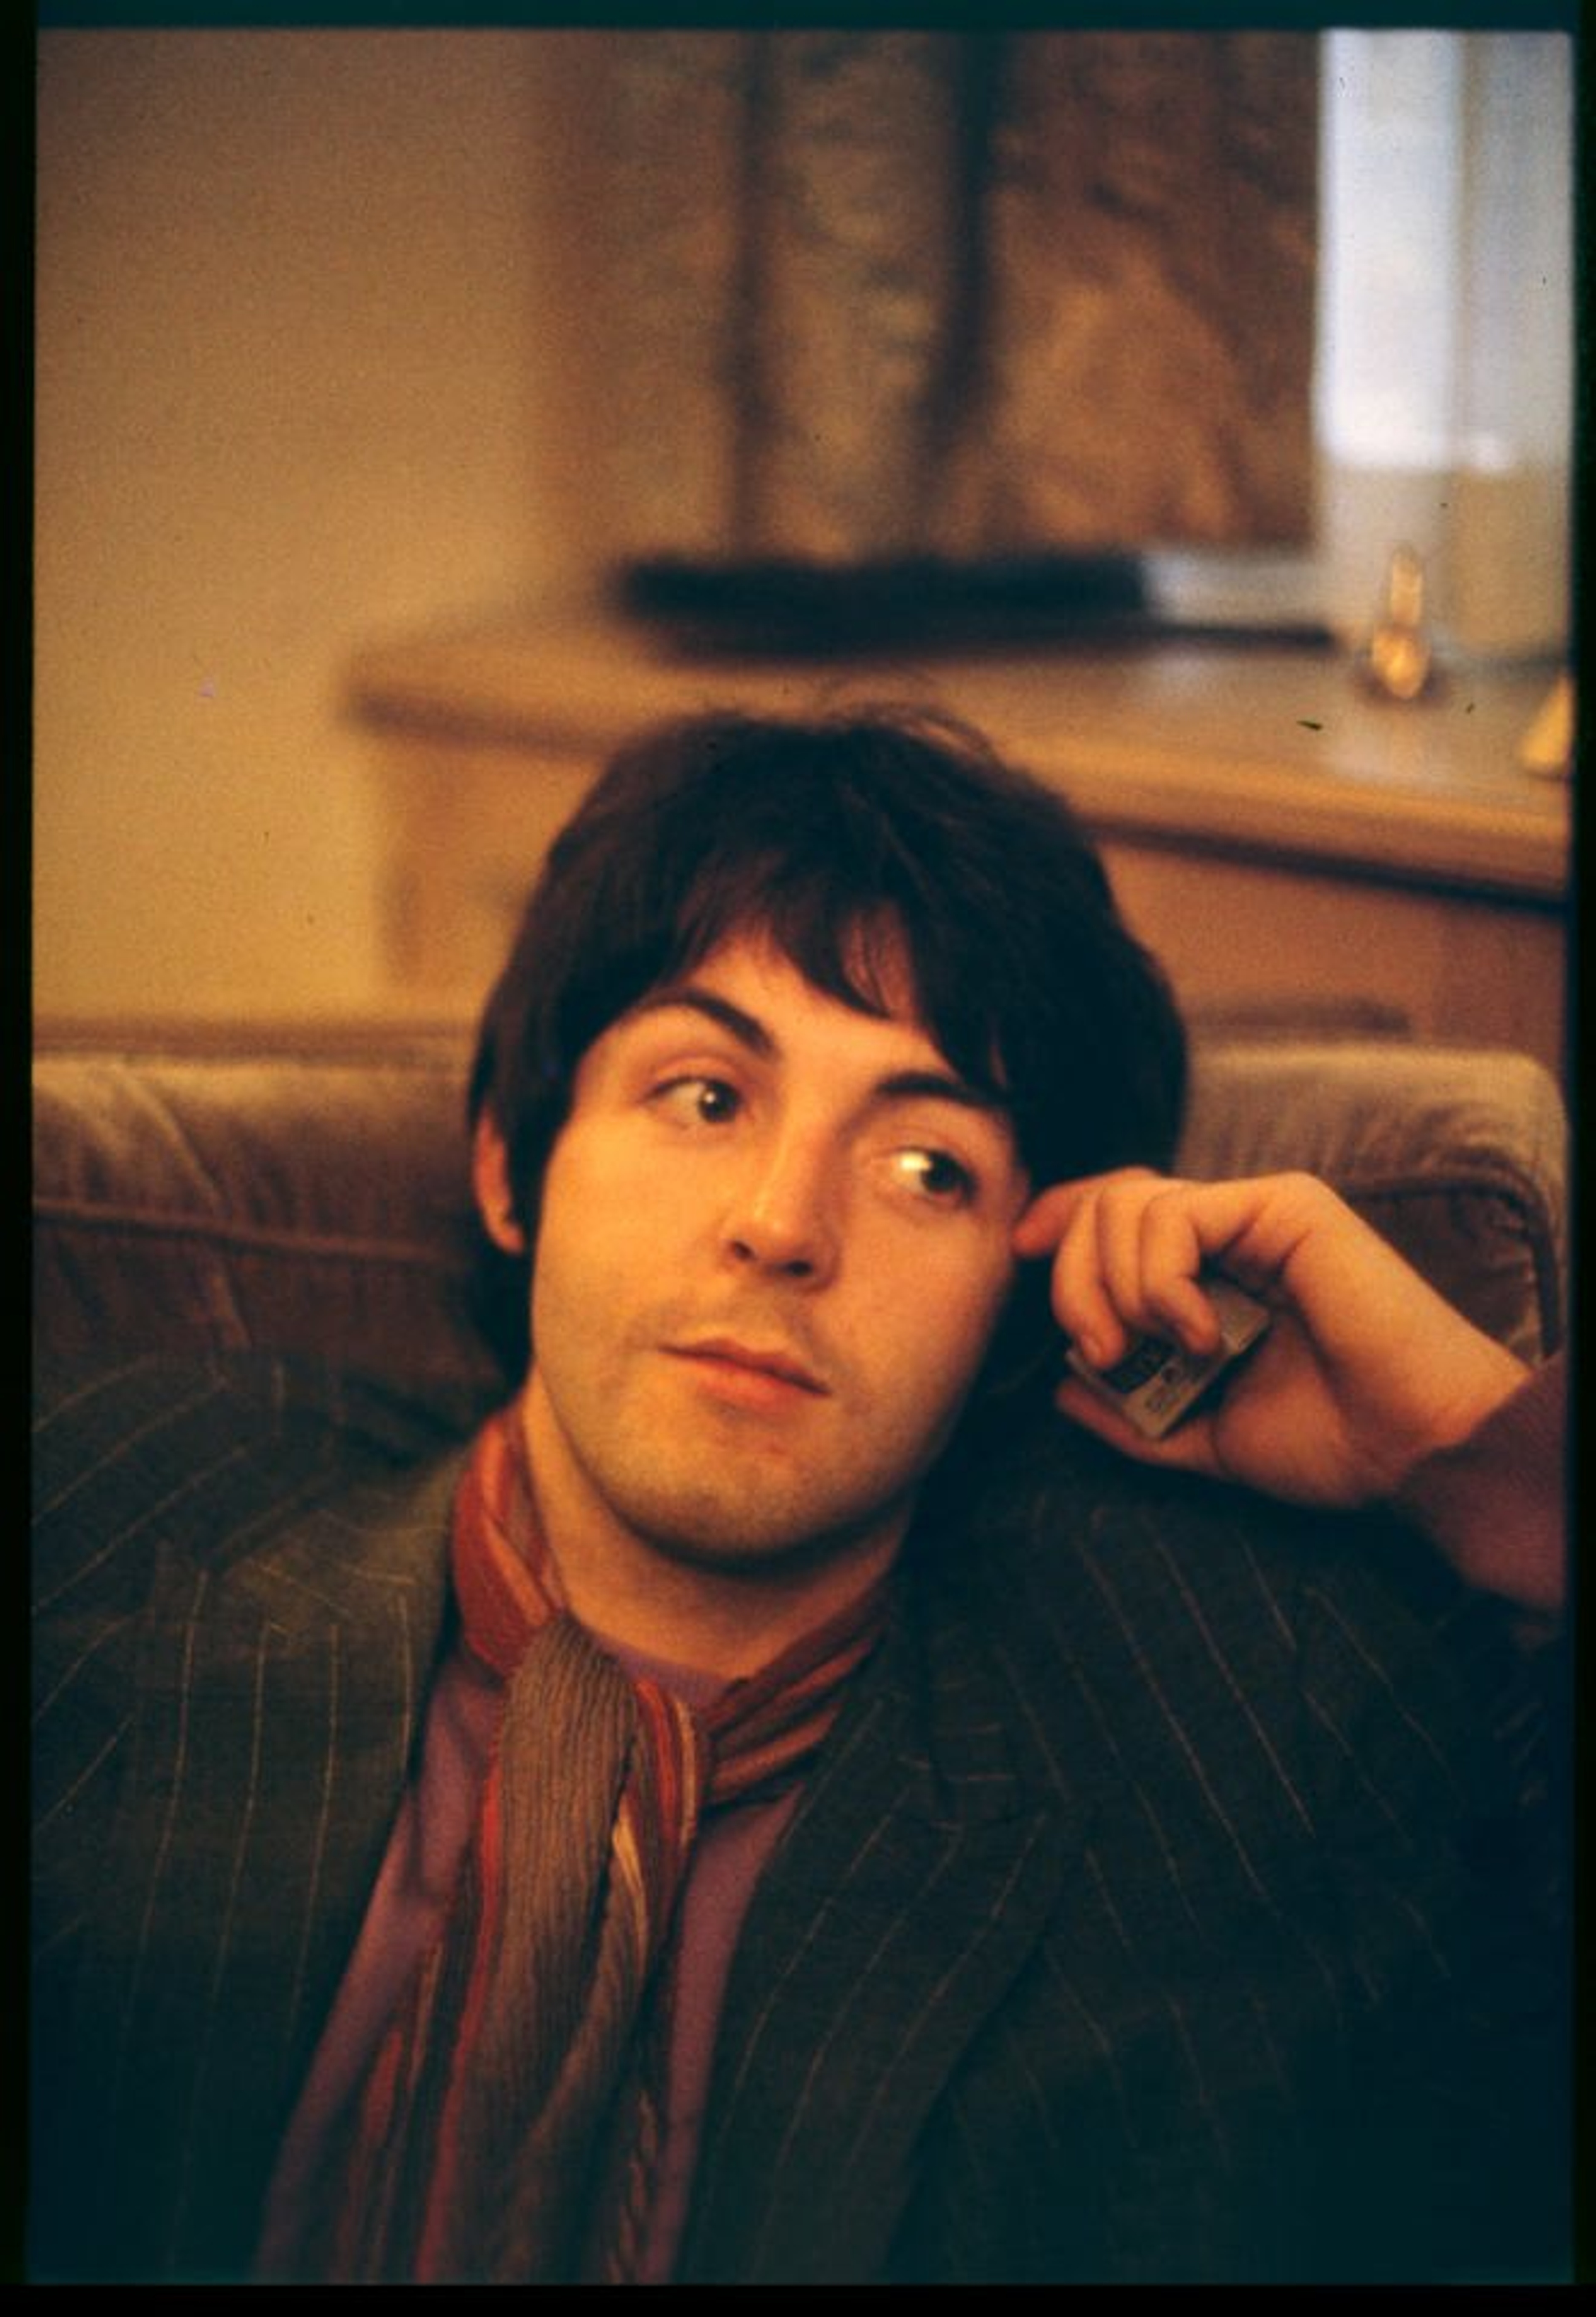 Colour photograph of Paul used for the cover of the 'McCARTNEY: A LIFE IN LYRICS' podcast. The photograph was taken by Linda McCartney